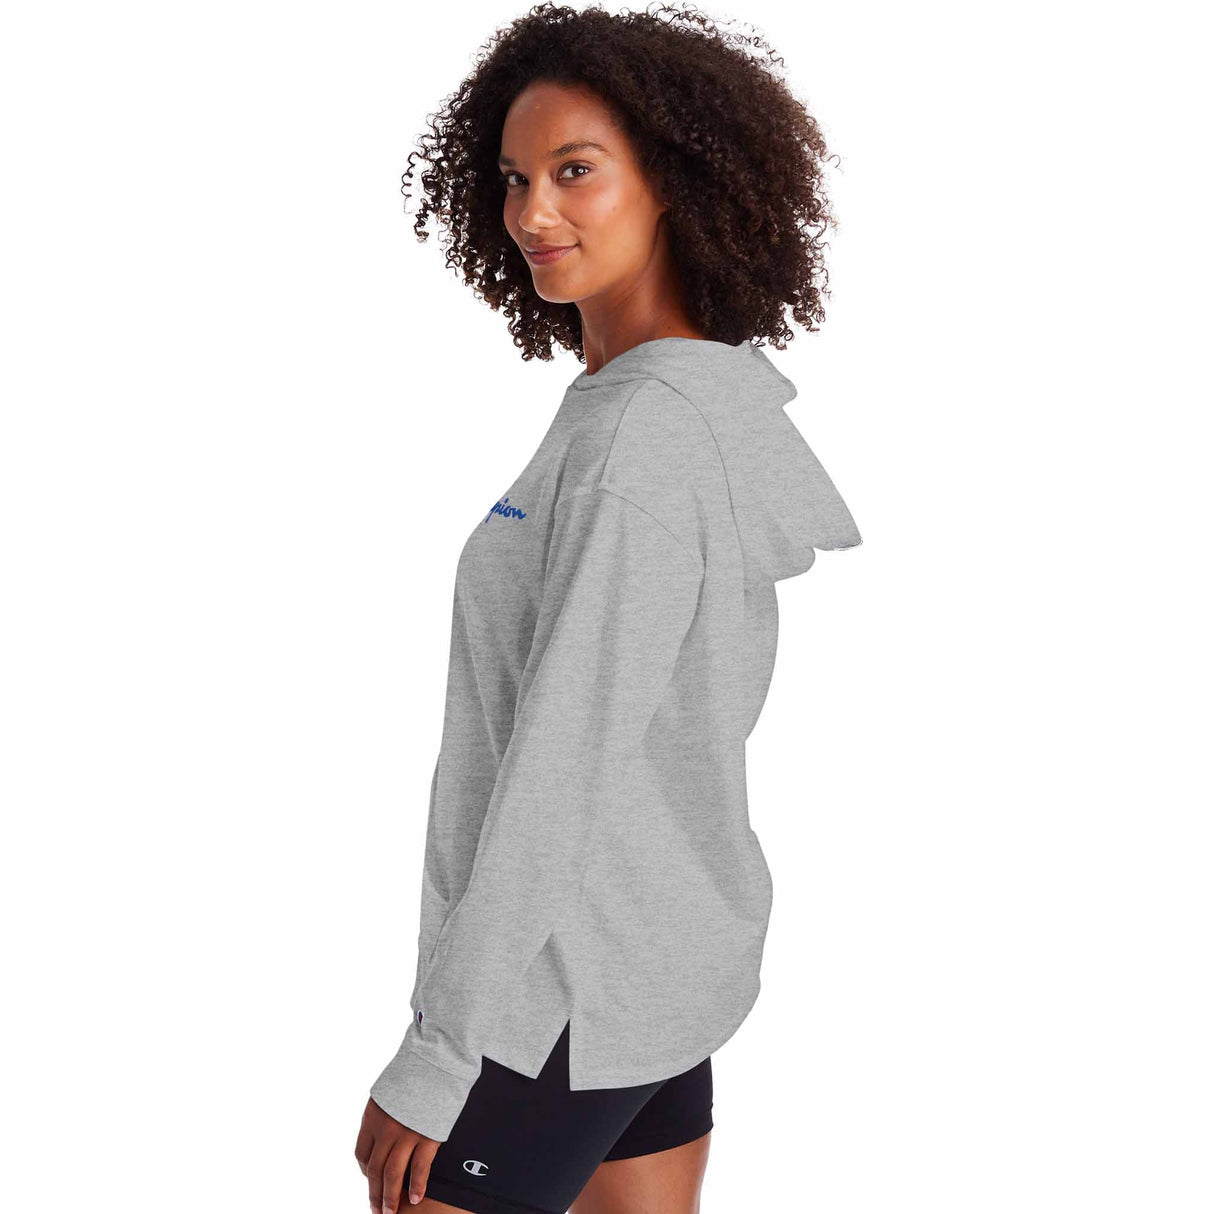 Champion Middleweight Hoodie Sweatshirt pour femme oxford gray angle